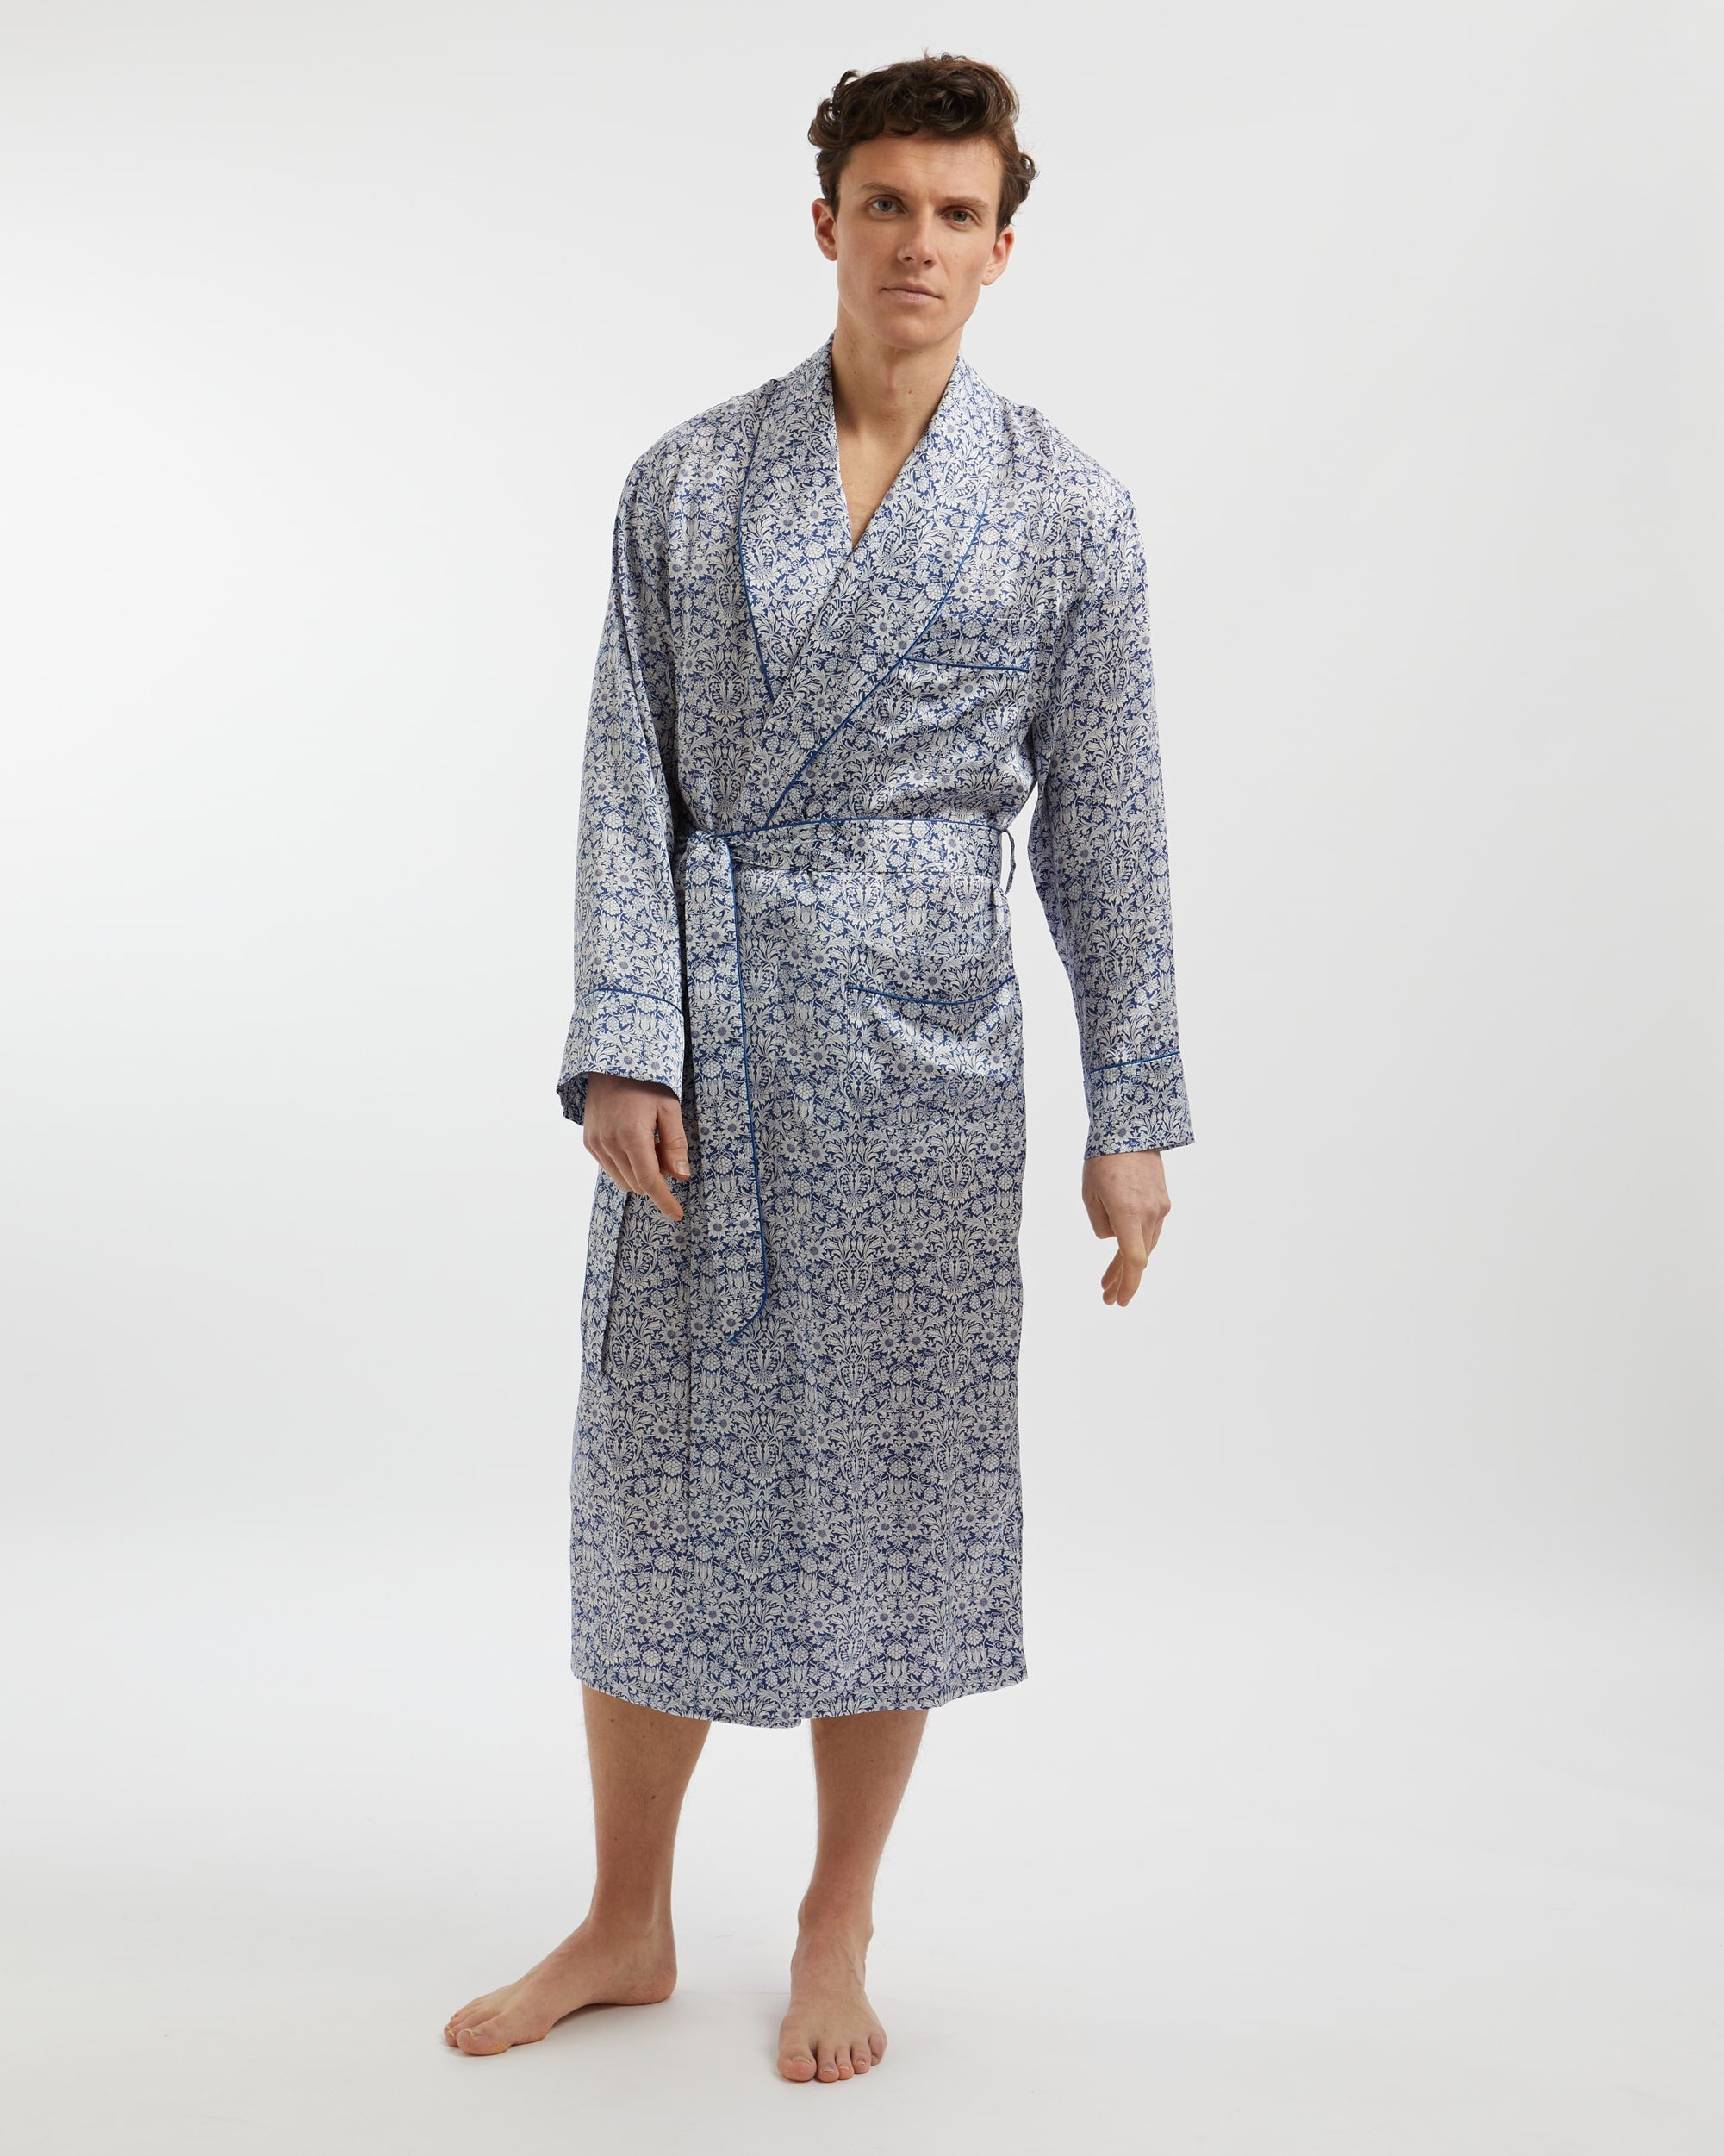 Lightweight Men's Dressing Gown - Gatsby Paisley Wine – Bown of London  Europe